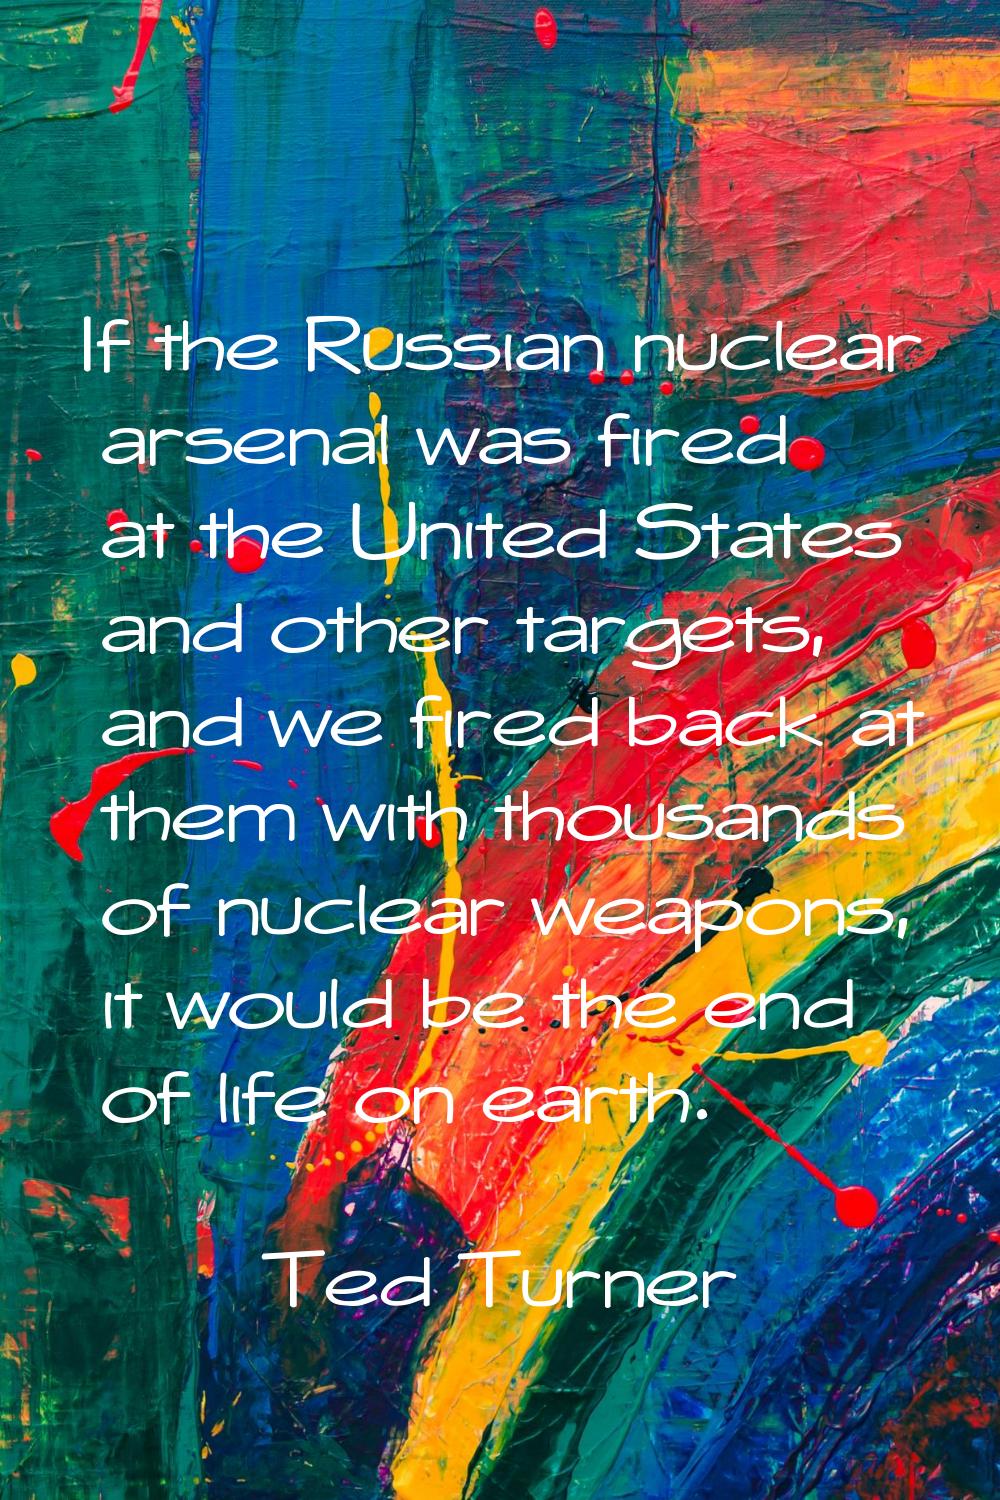 If the Russian nuclear arsenal was fired at the United States and other targets, and we fired back 